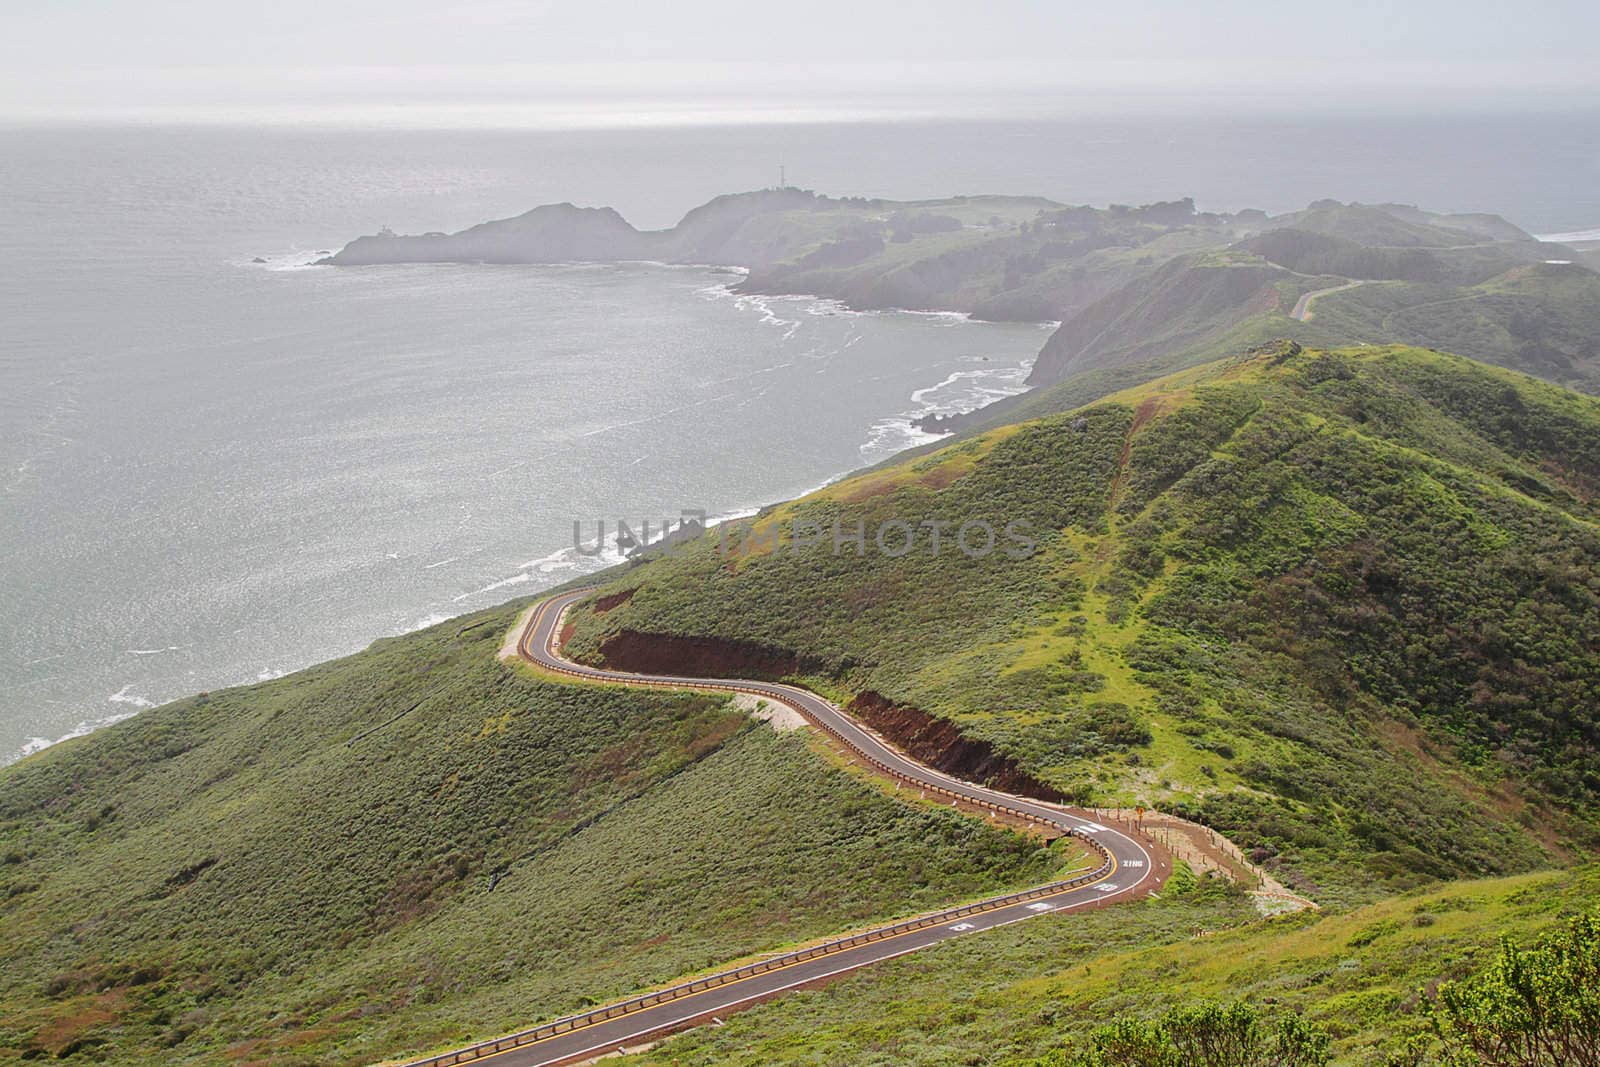 Road by the ocean on hills